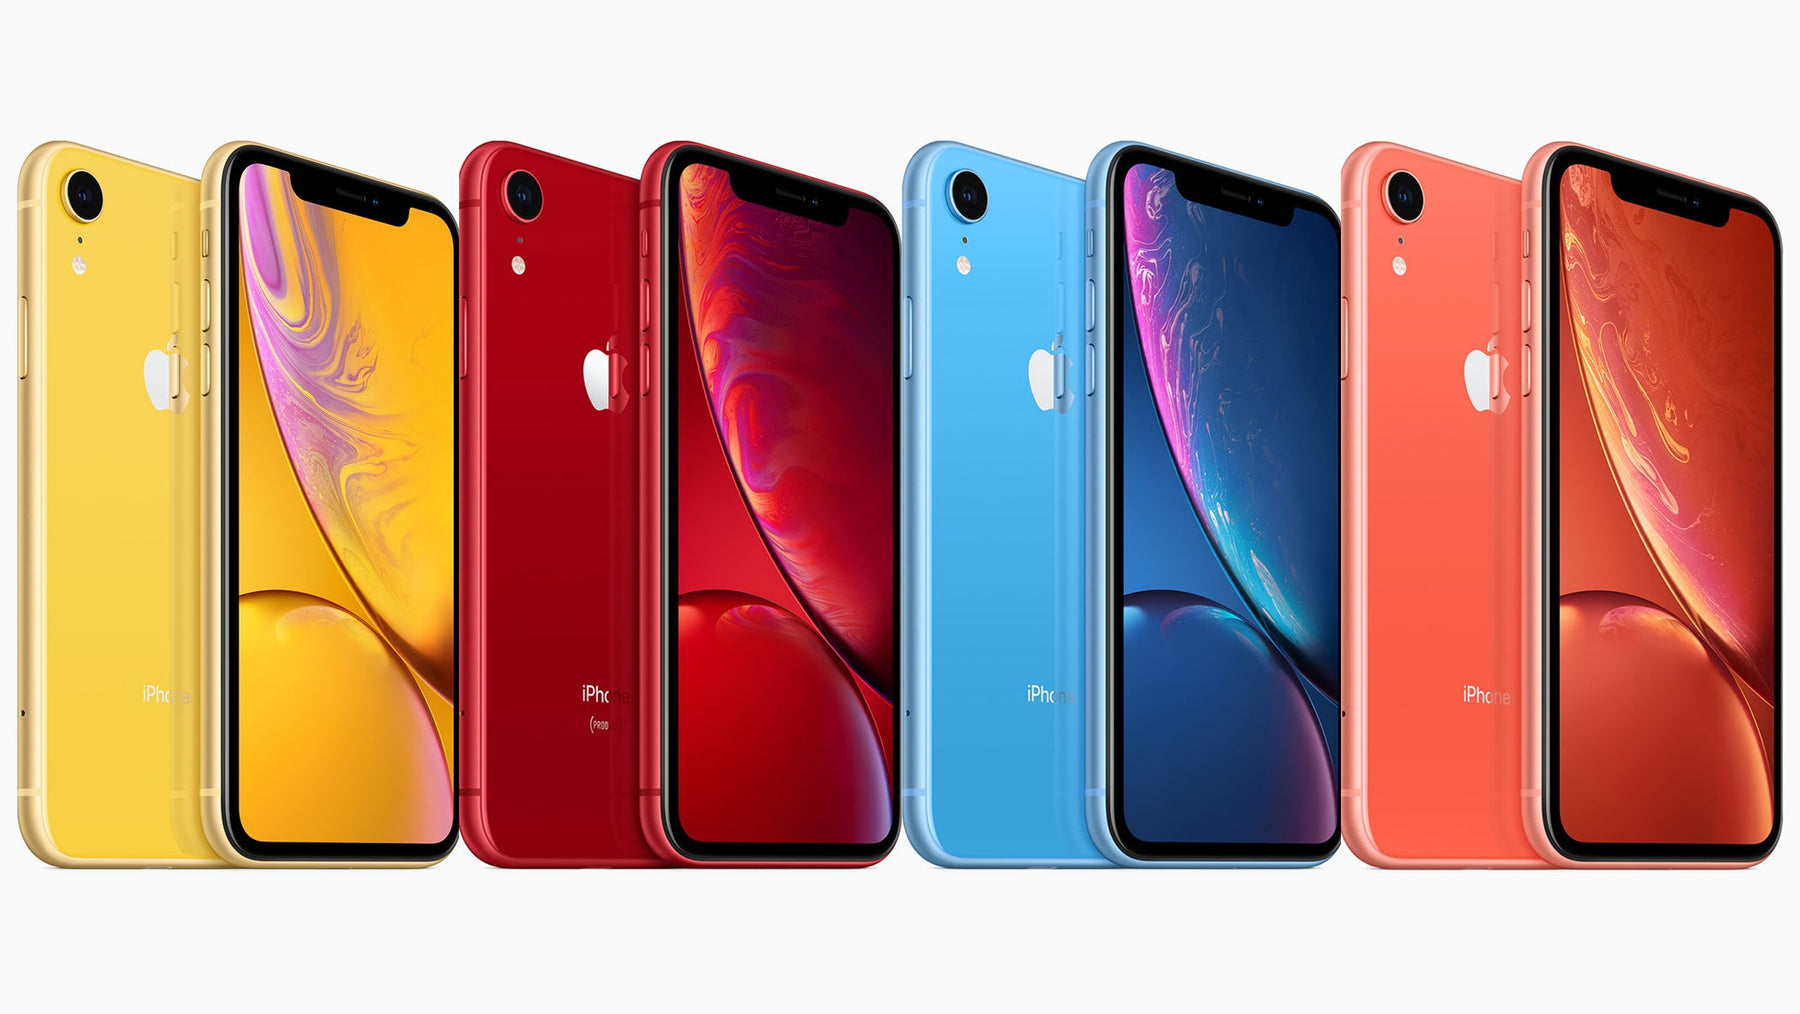 iPhone XR colours - what are the options?